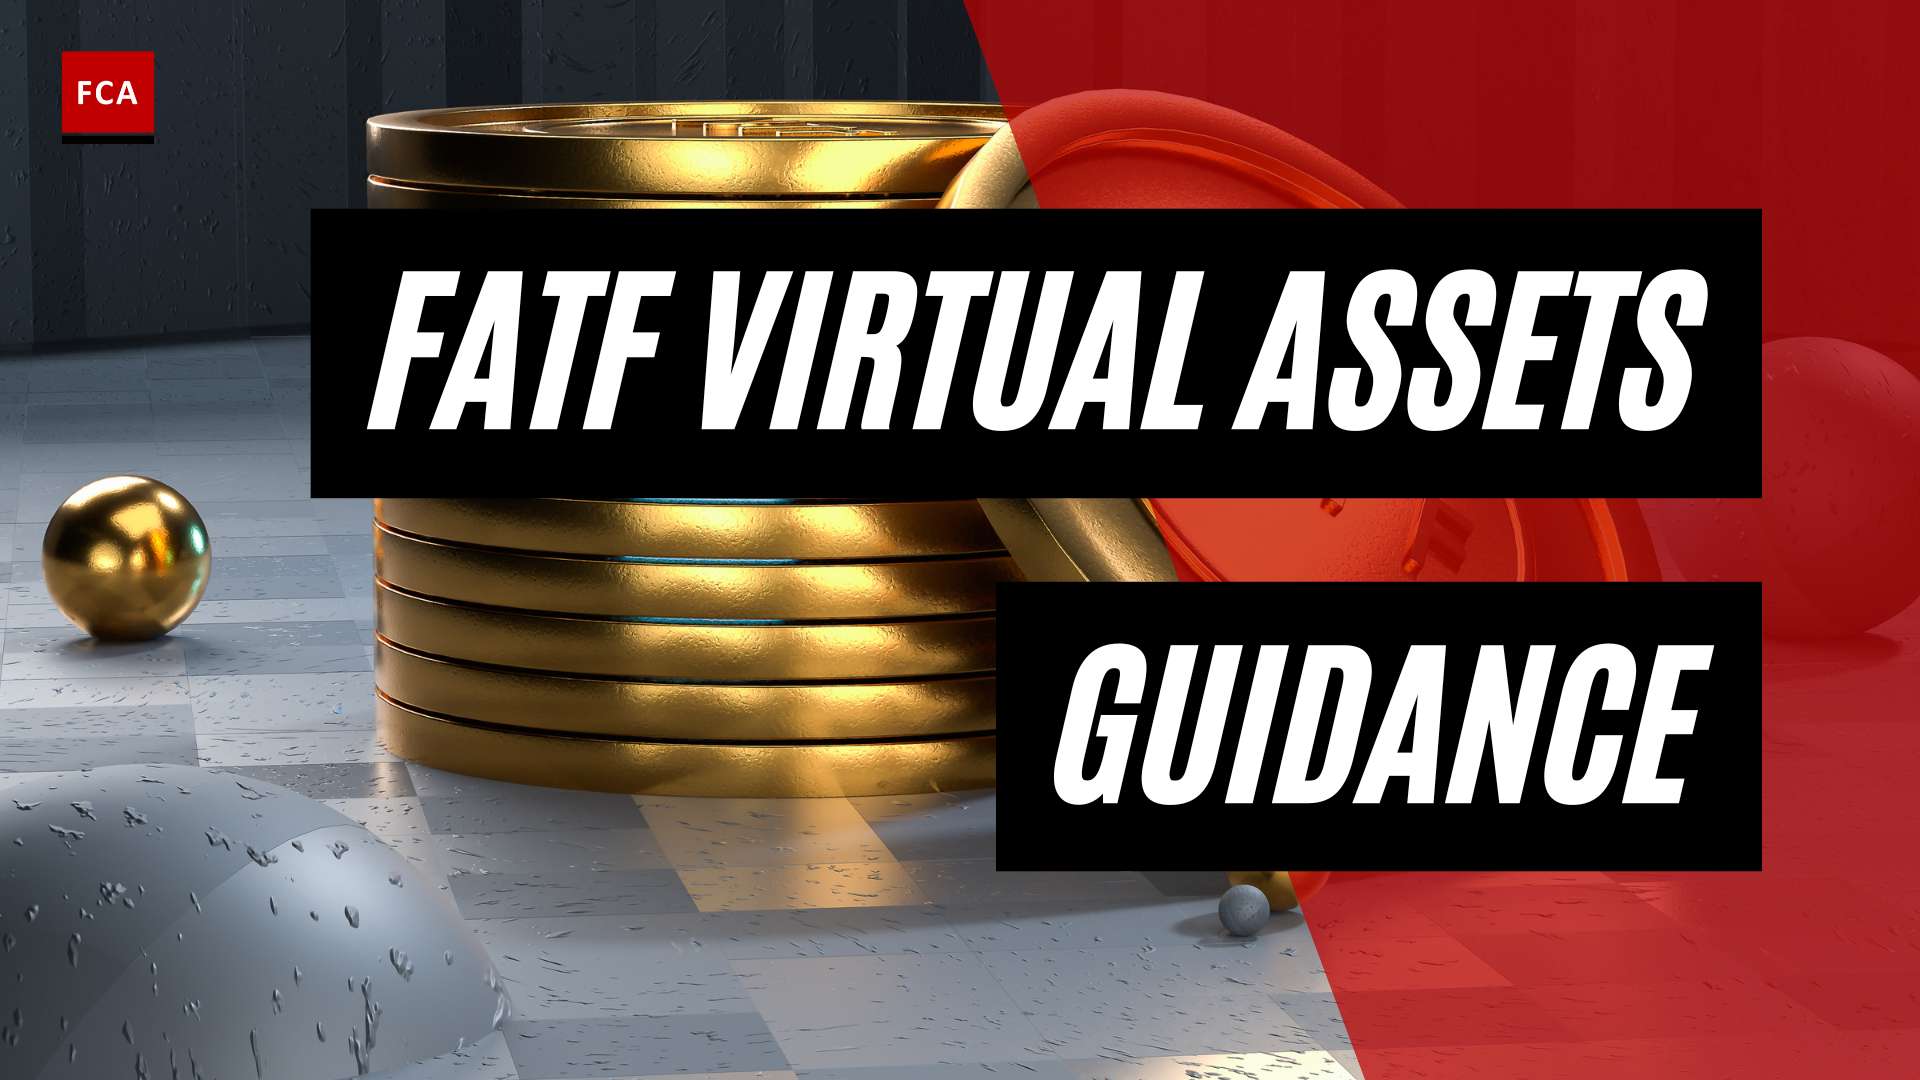 Deciphering Fatf Virtual Assets Guidance: A Must-Know For Aml Professionals